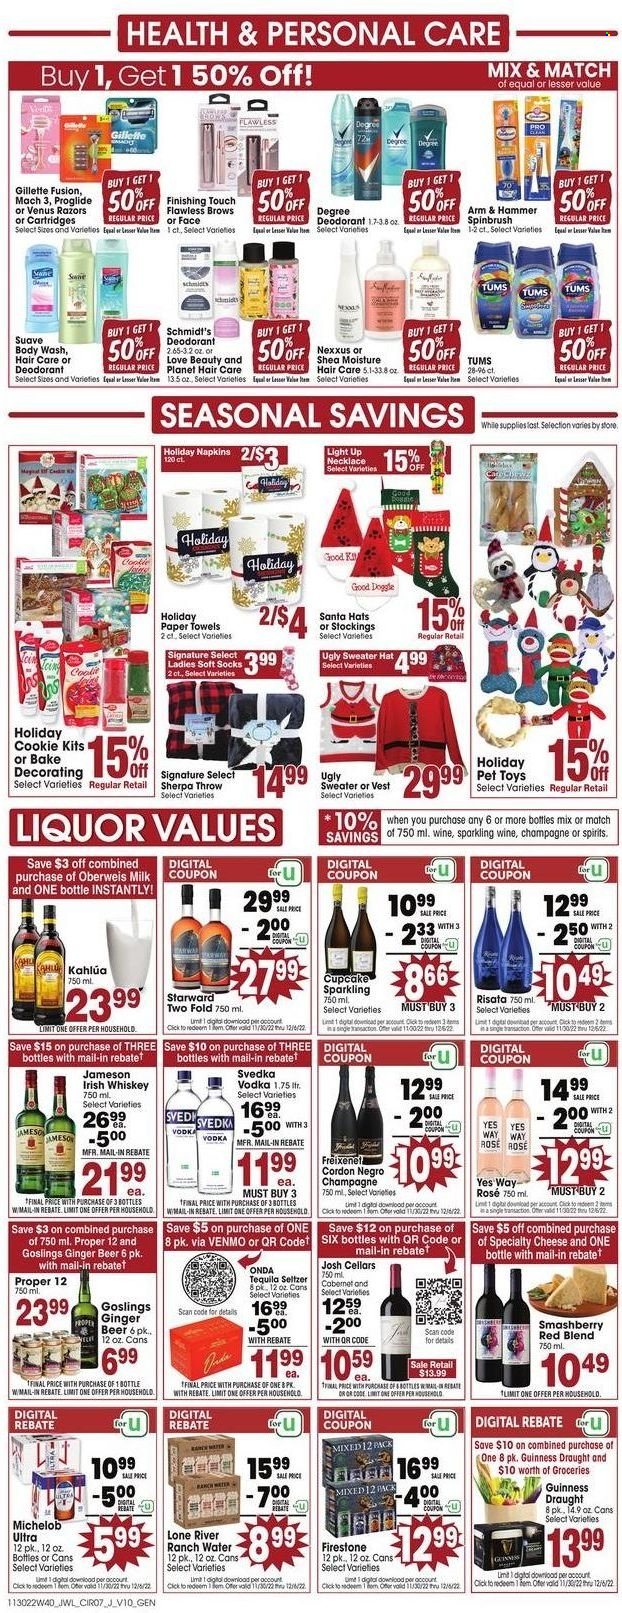 thumbnail - Jewel Osco Flyer - 11/30/2022 - 12/06/2022 - Sales products - cupcake, cheese, milk, UglyDolls, Santa, ARM & HAMMER, seltzer water, Cabernet Sauvignon, sparkling wine, rosé wine, tequila, vodka, whiskey, irish whiskey, Jameson, liquor, whisky, beer, Guinness, napkins, kitchen towels, paper towels, body wash, Suave, Nexxus, anti-perspirant, deodorant, Gillette, necklace, vest, Michelob, ginger beer. Page 7.